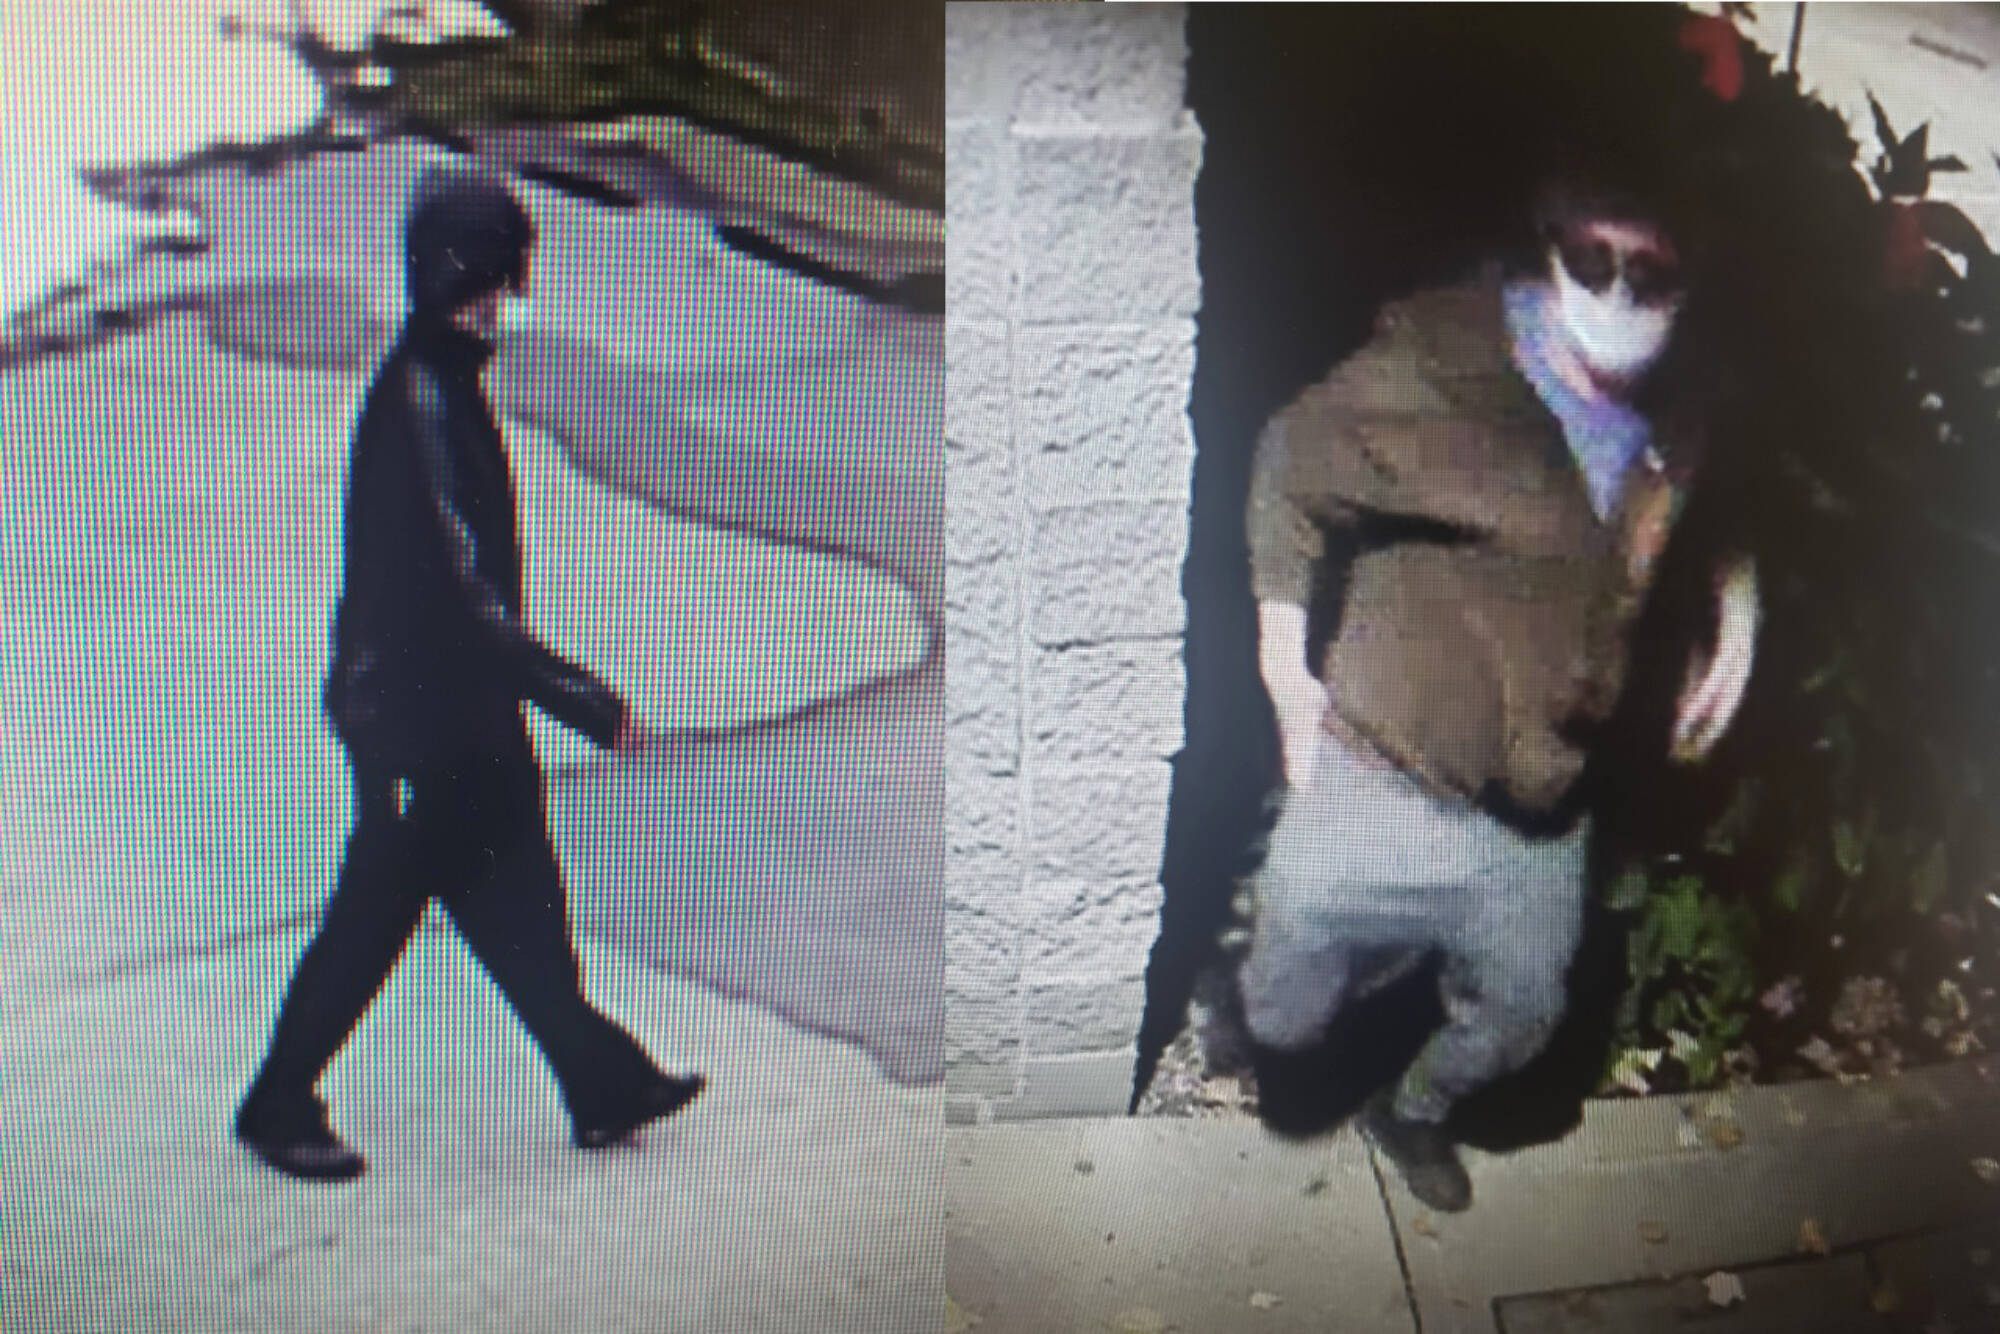 Both Sicamous and Salmon Arm RCMP are requesting the public’s help locating the suspect in two separate incidents in Sicamous and Salmon Arm on Oct. 21 that they think may have been committed by the same person. The first image from left was taken in Sicamous, the second in Salmon Arm. (RCMP images)